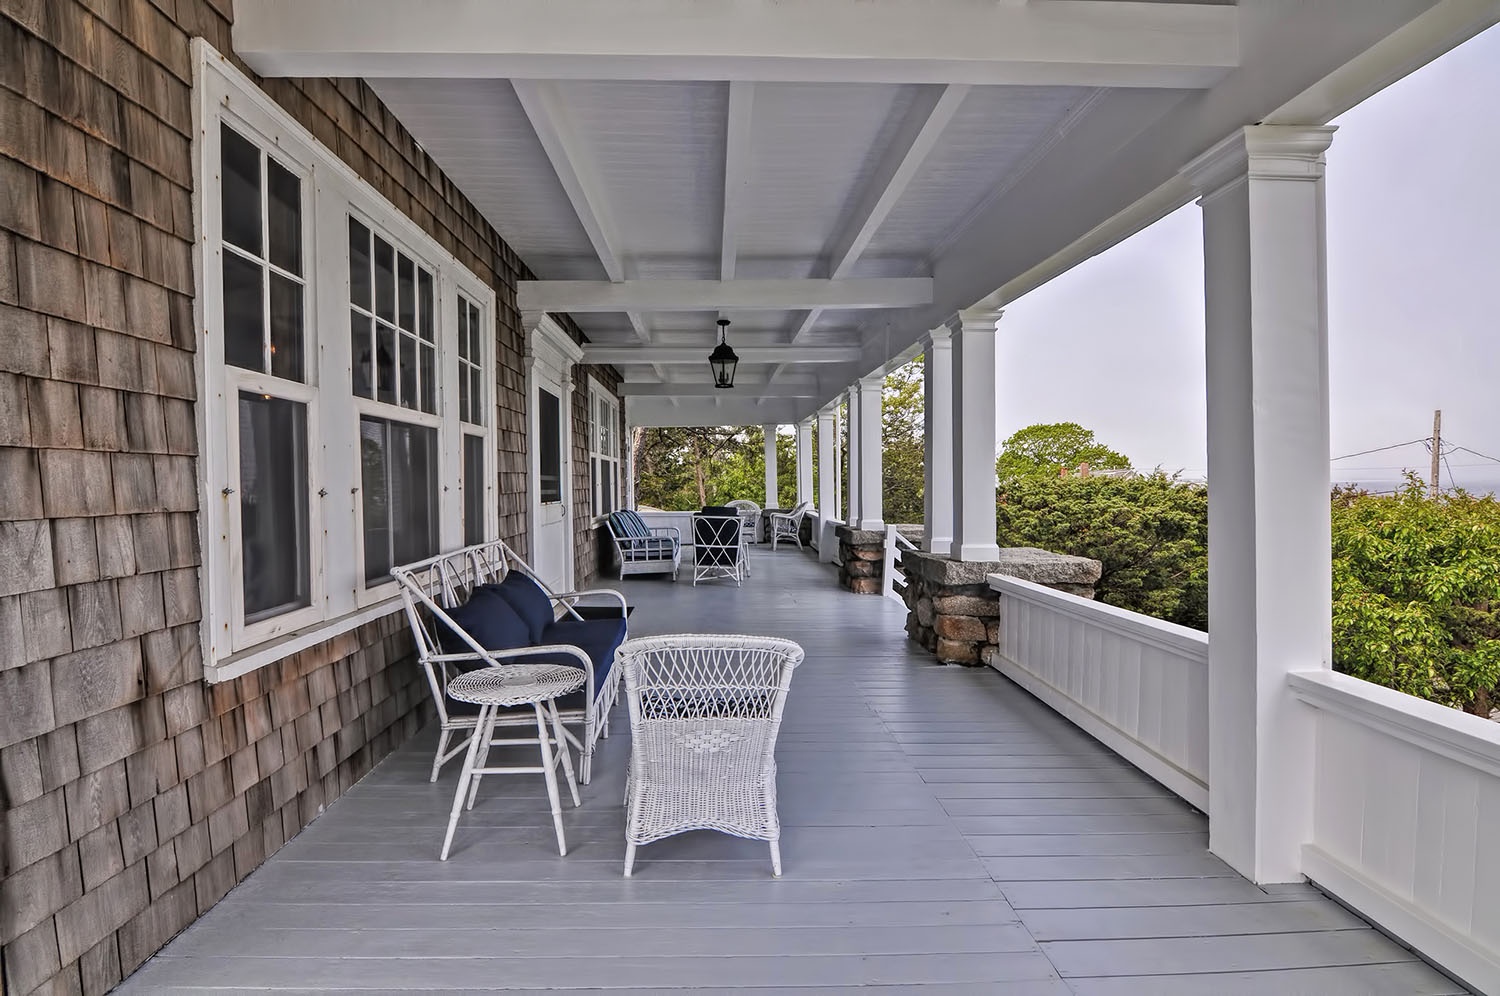 Exterior view of the large front porch with ocean views.